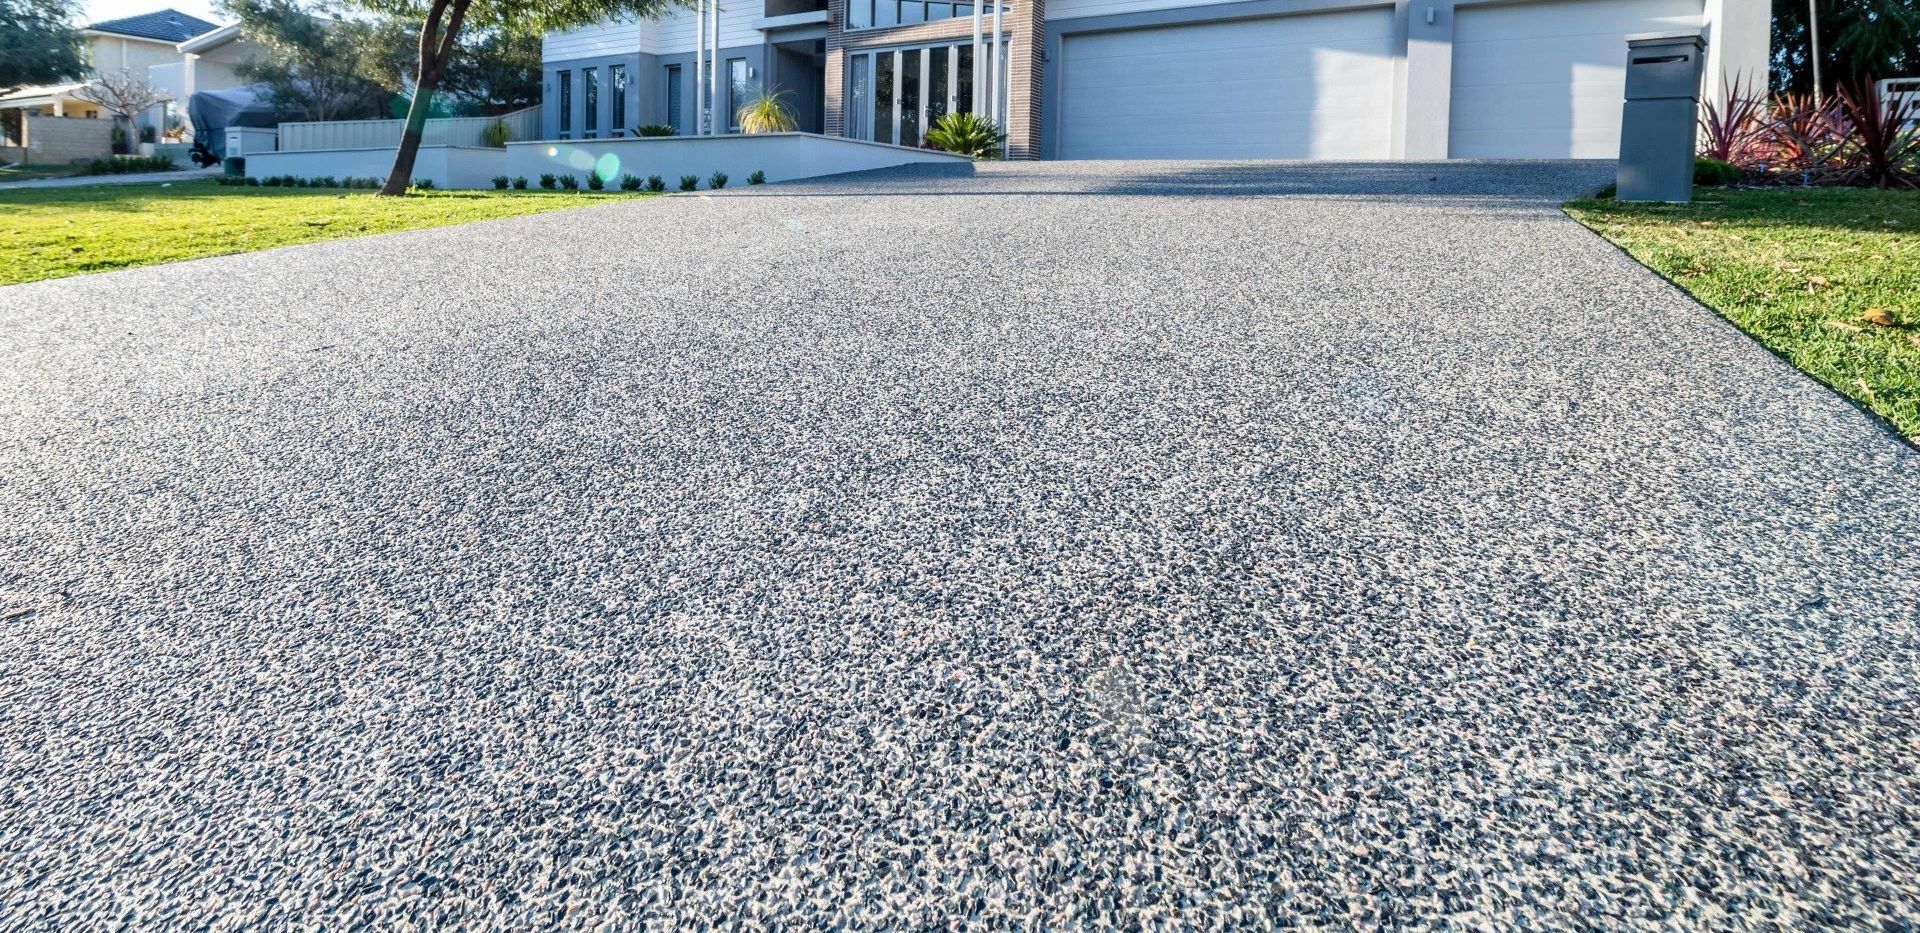 A smooth, expansive gray driveway leads up to a modern house with large windows and a garage. Expertly crafted by top Concrete Contractors in West Palm Beach FL, the driveway is flanked by green grass and a small landscaped area on one side. The scene is well-lit with the sun shining brightly.